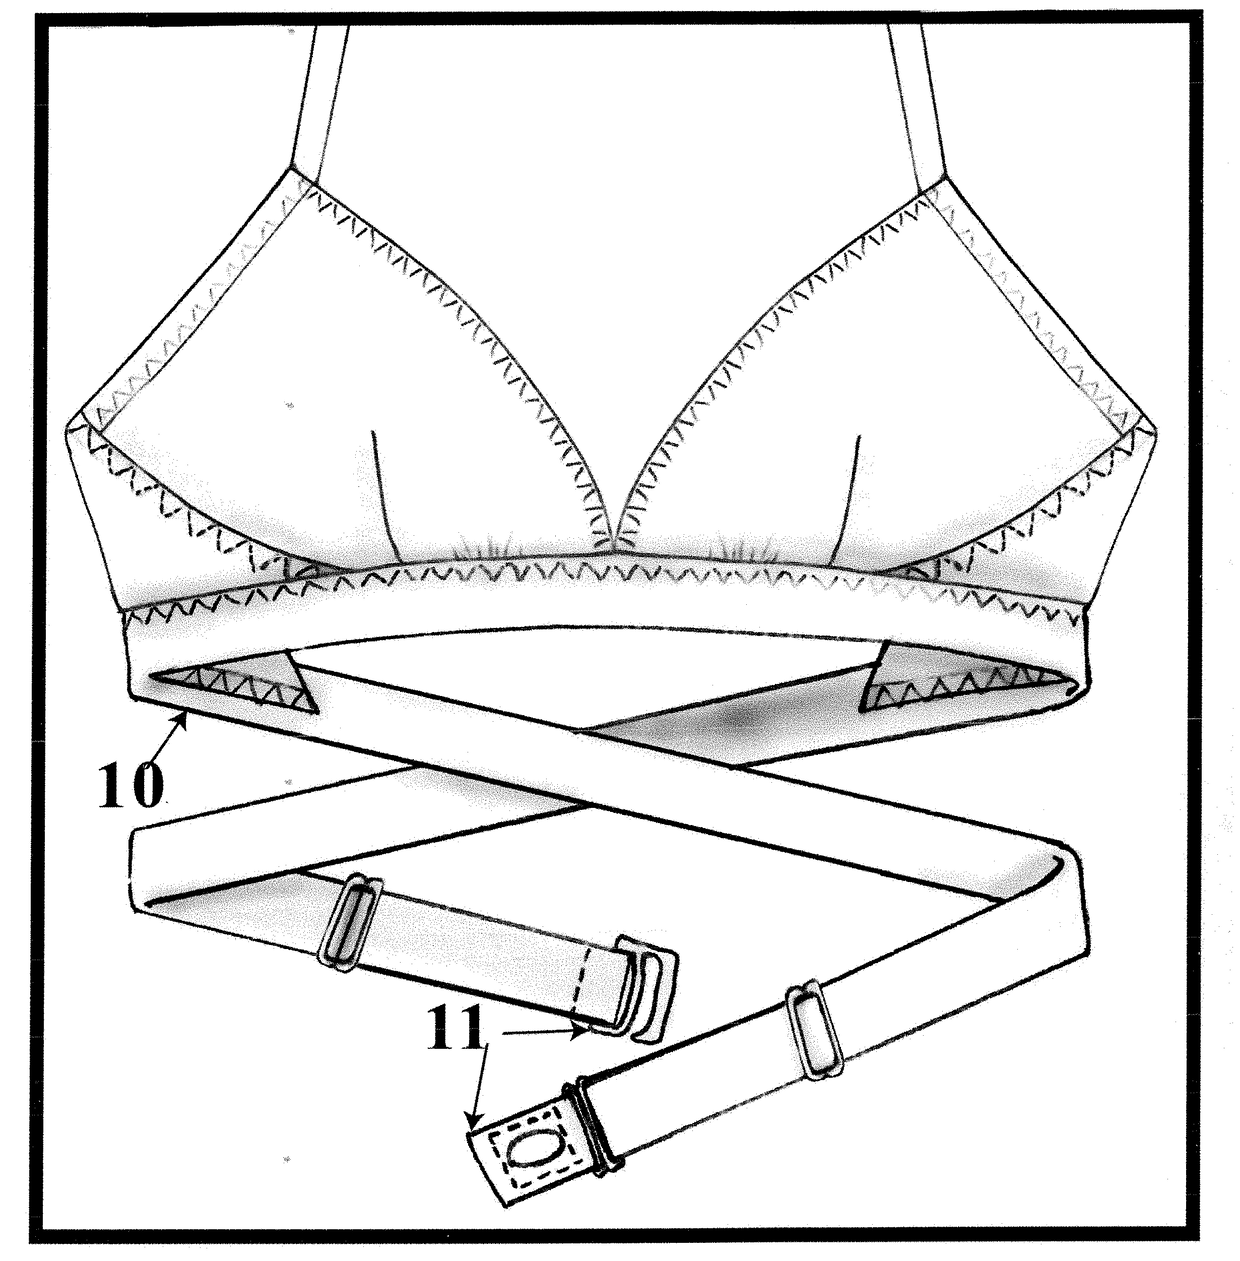 Flexible support structure for wire-free bras, bralettes and lingerie